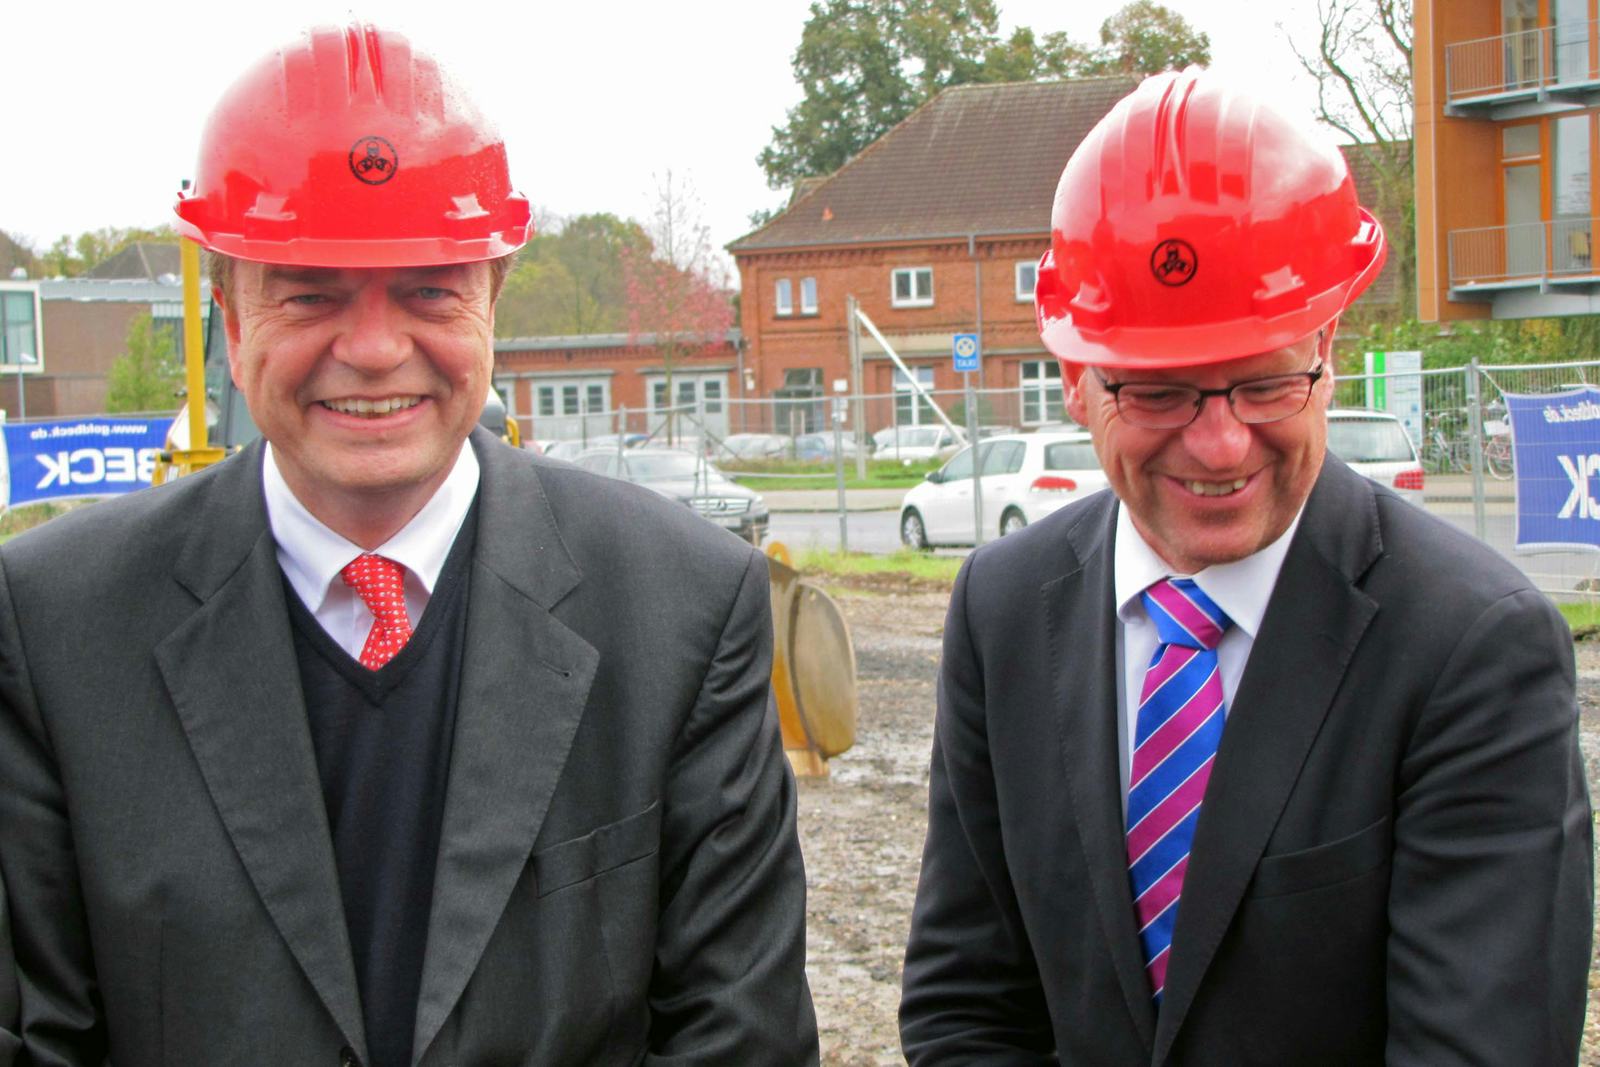 Trelock CEO and owner Andreas Rott (l.) together with the Münster mayor Markus Lewe at the ground breaking ceremony for the new Trelock factory. – Photo Bike Europe